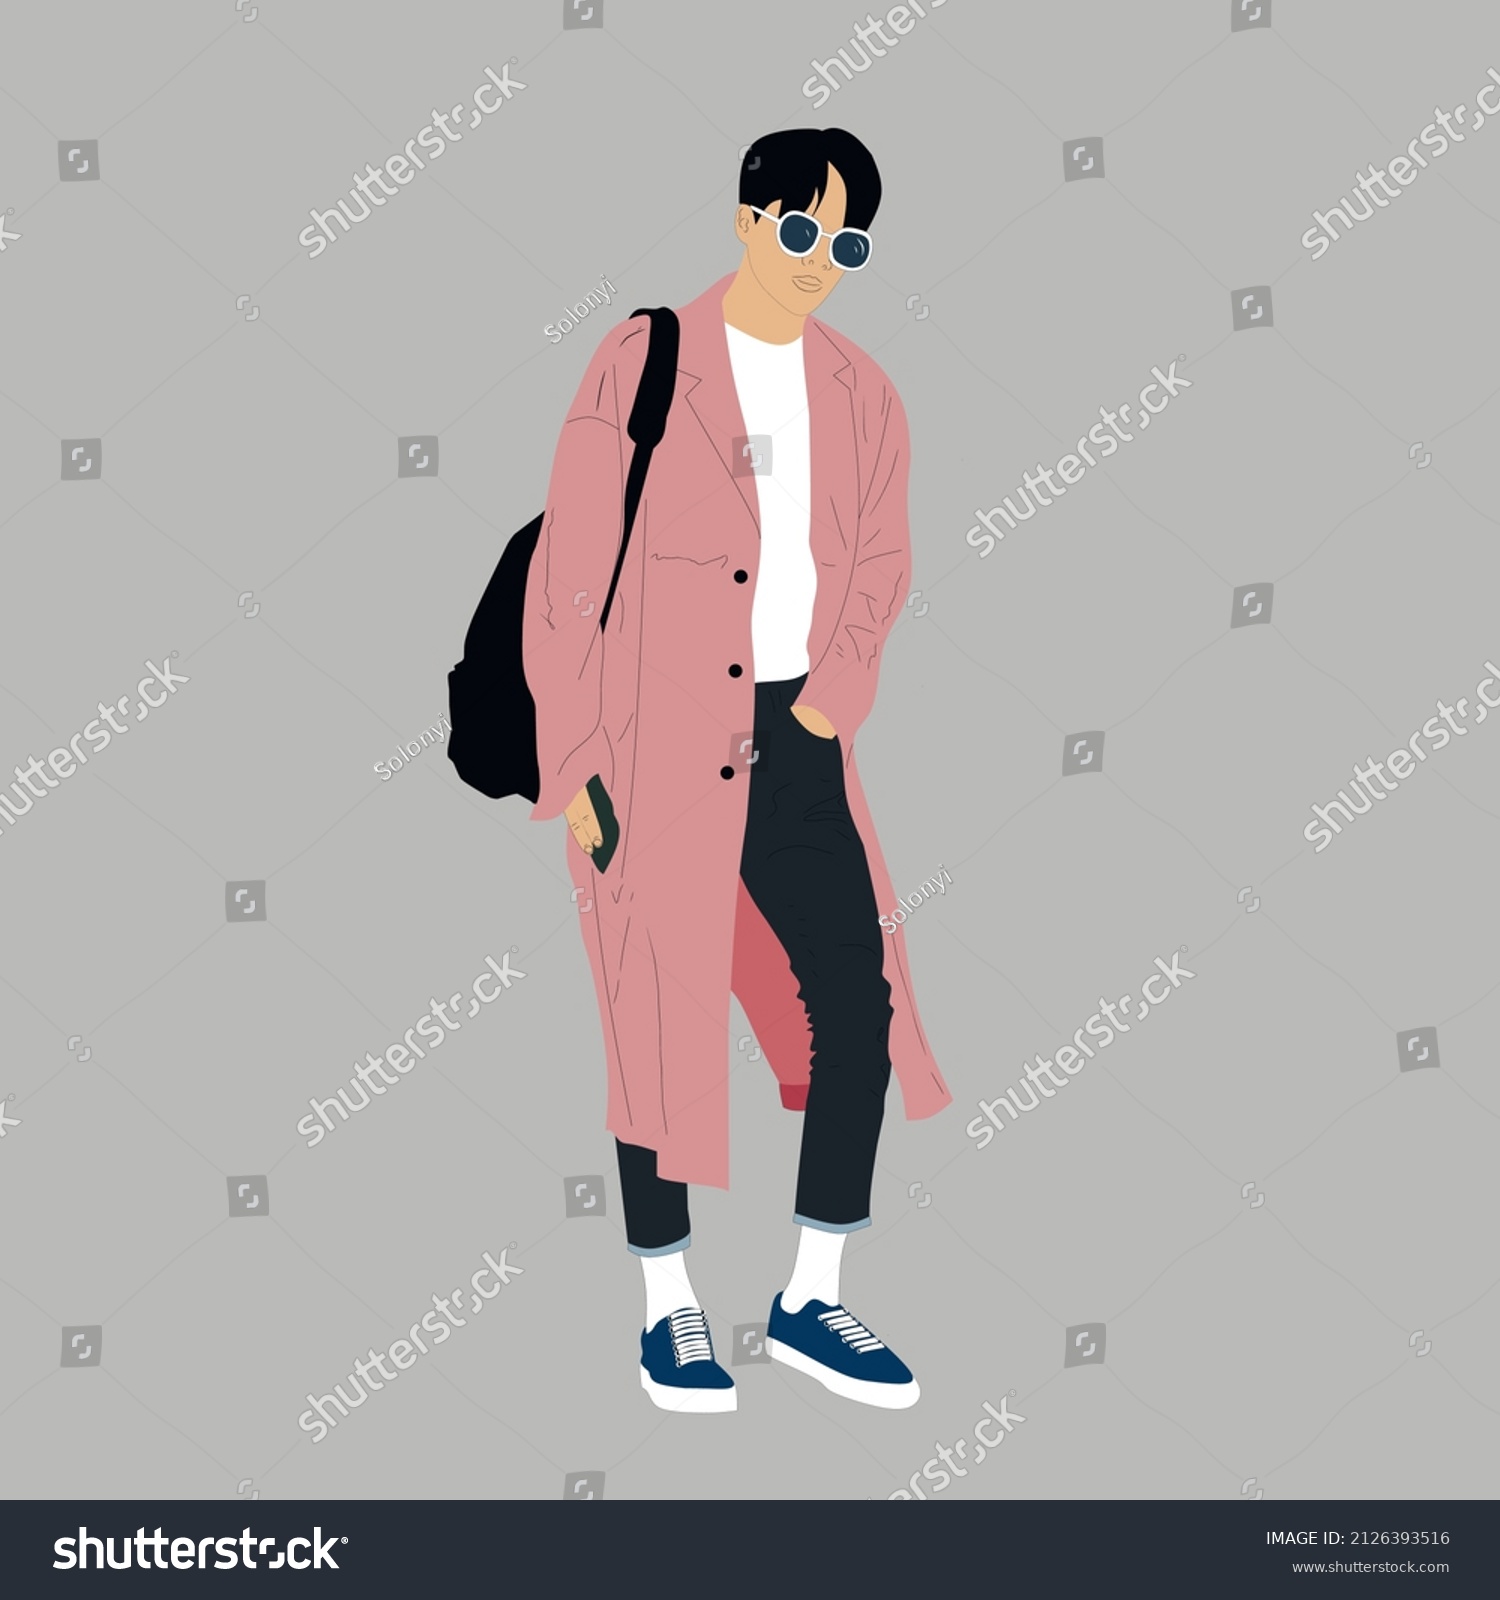 SVG of Vector illustration of Kpop street fashion. Street idols of Koreans. Kpop male idol fashion. A guy in blue jeans and a pink raincoat. svg